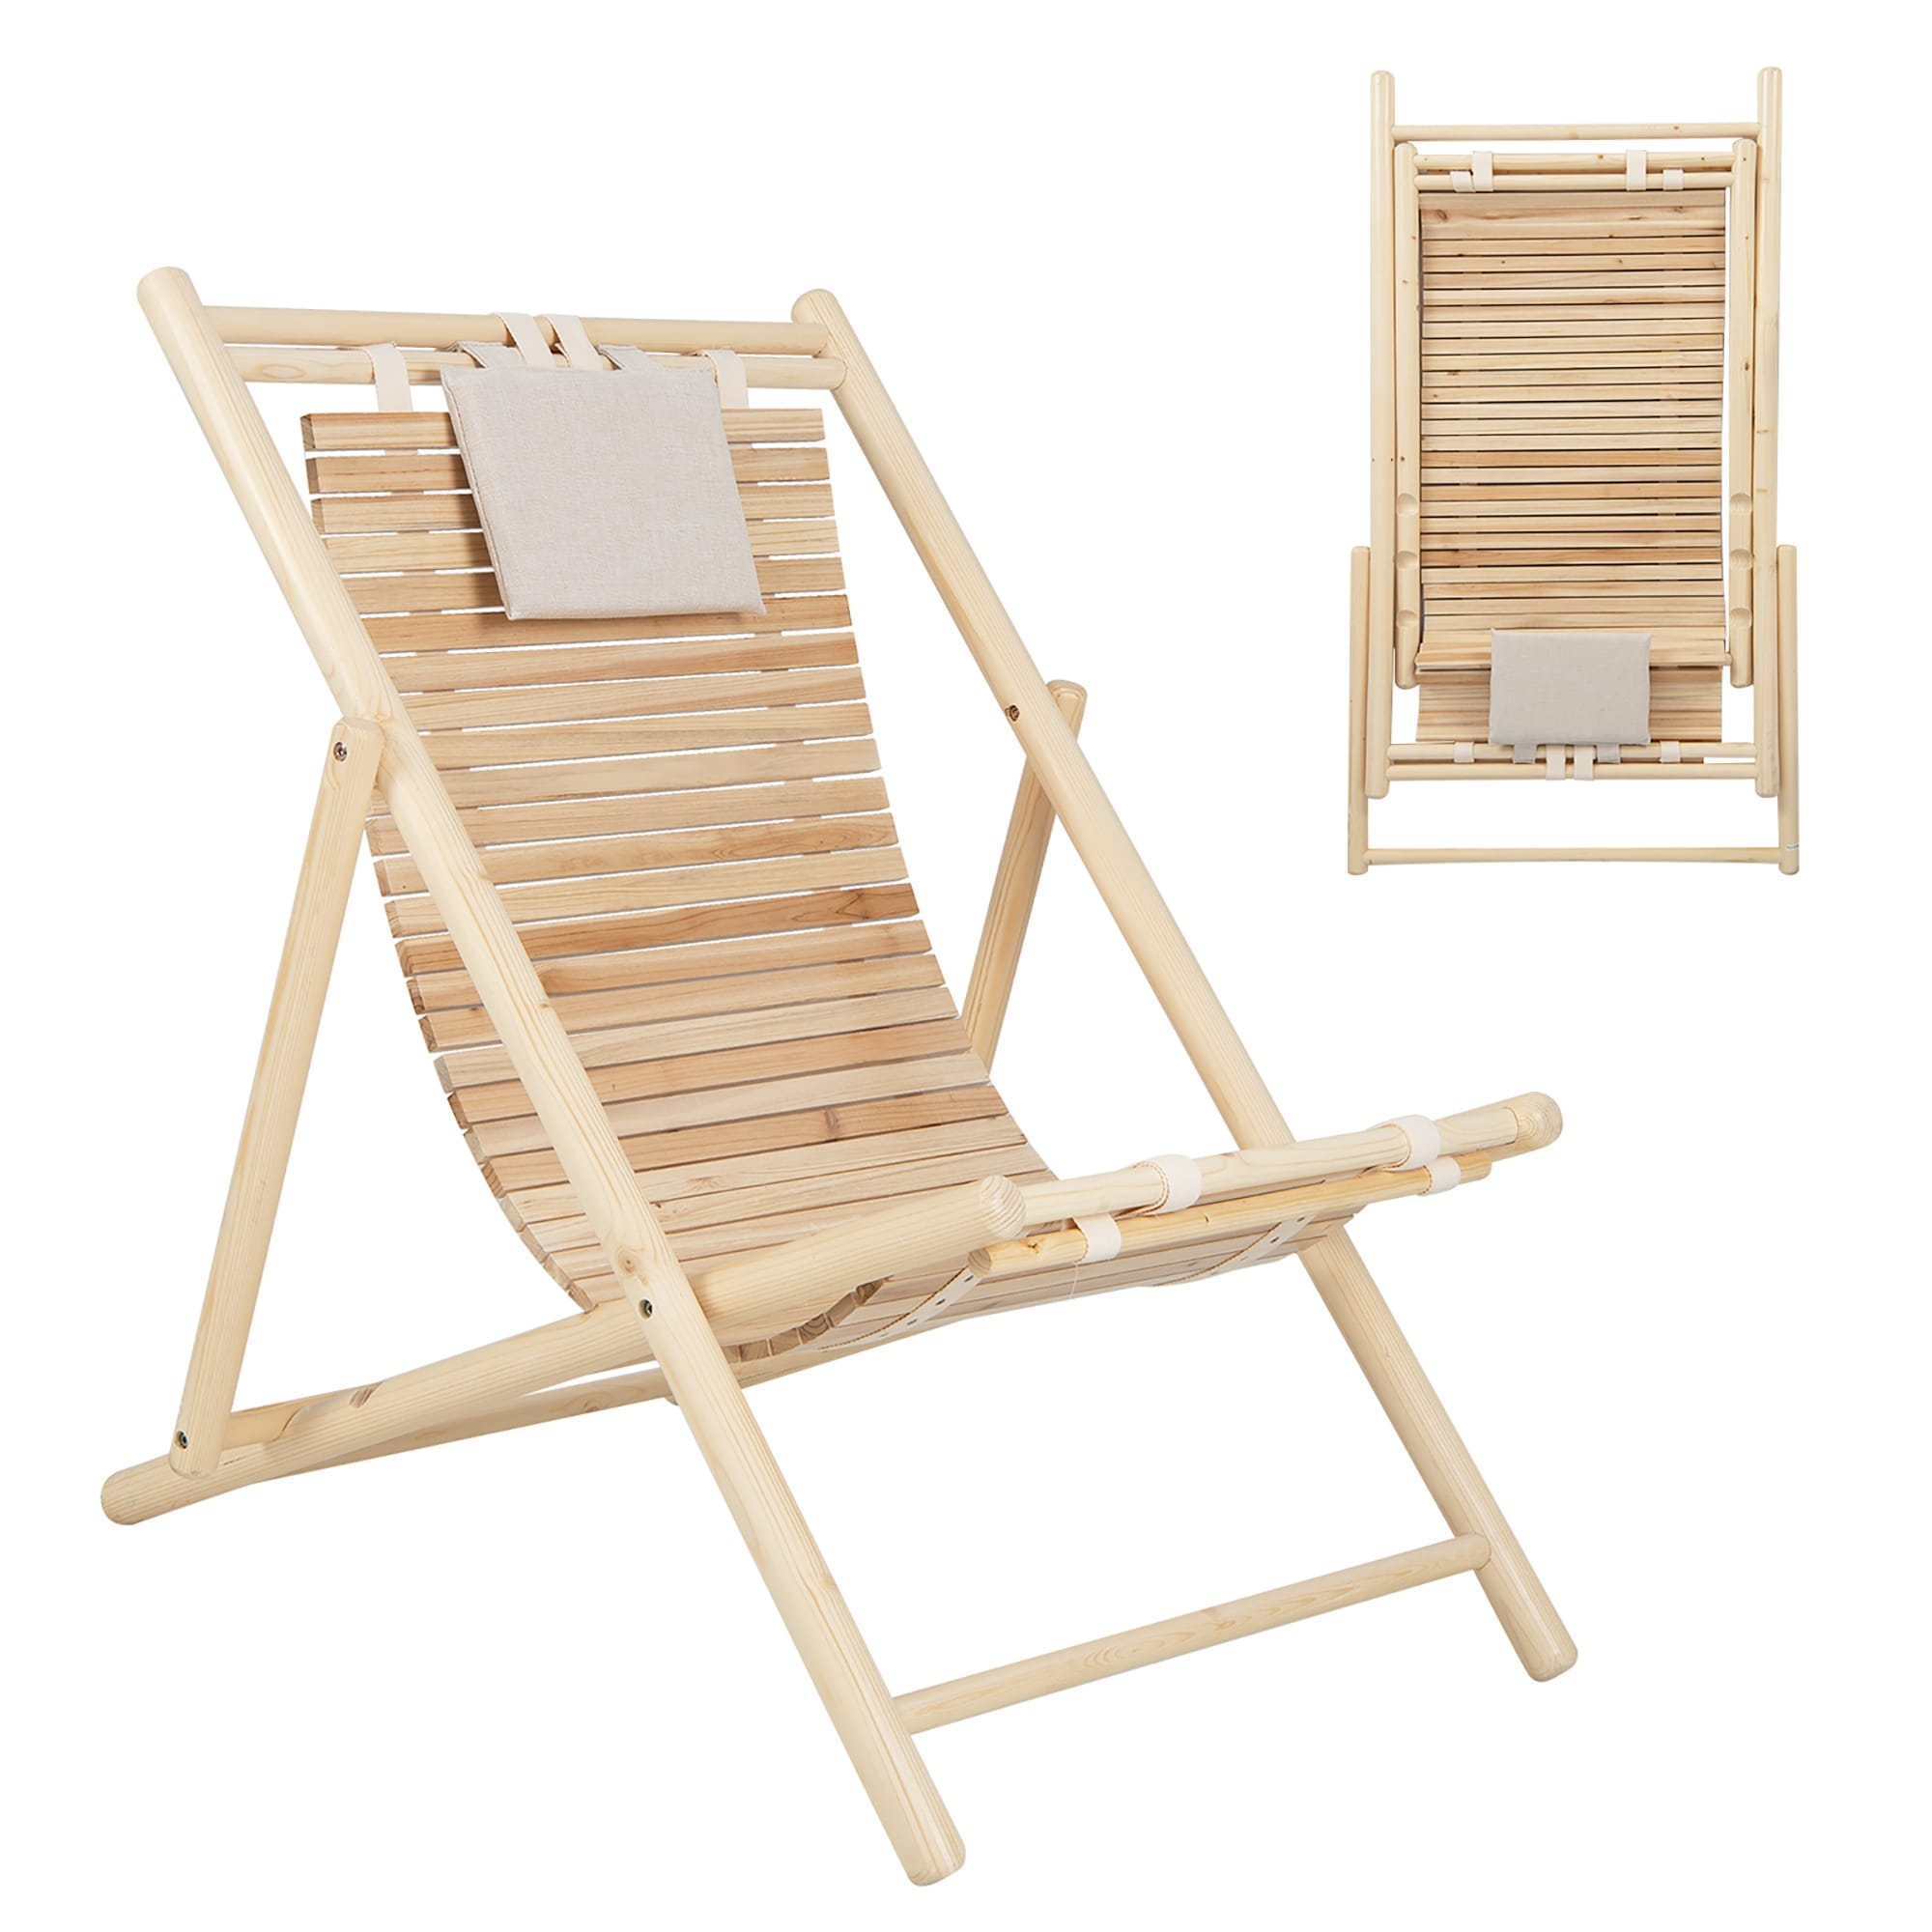 Patio Outdoor Adjustable Folding Wood Sling Chair Reclining Lounge